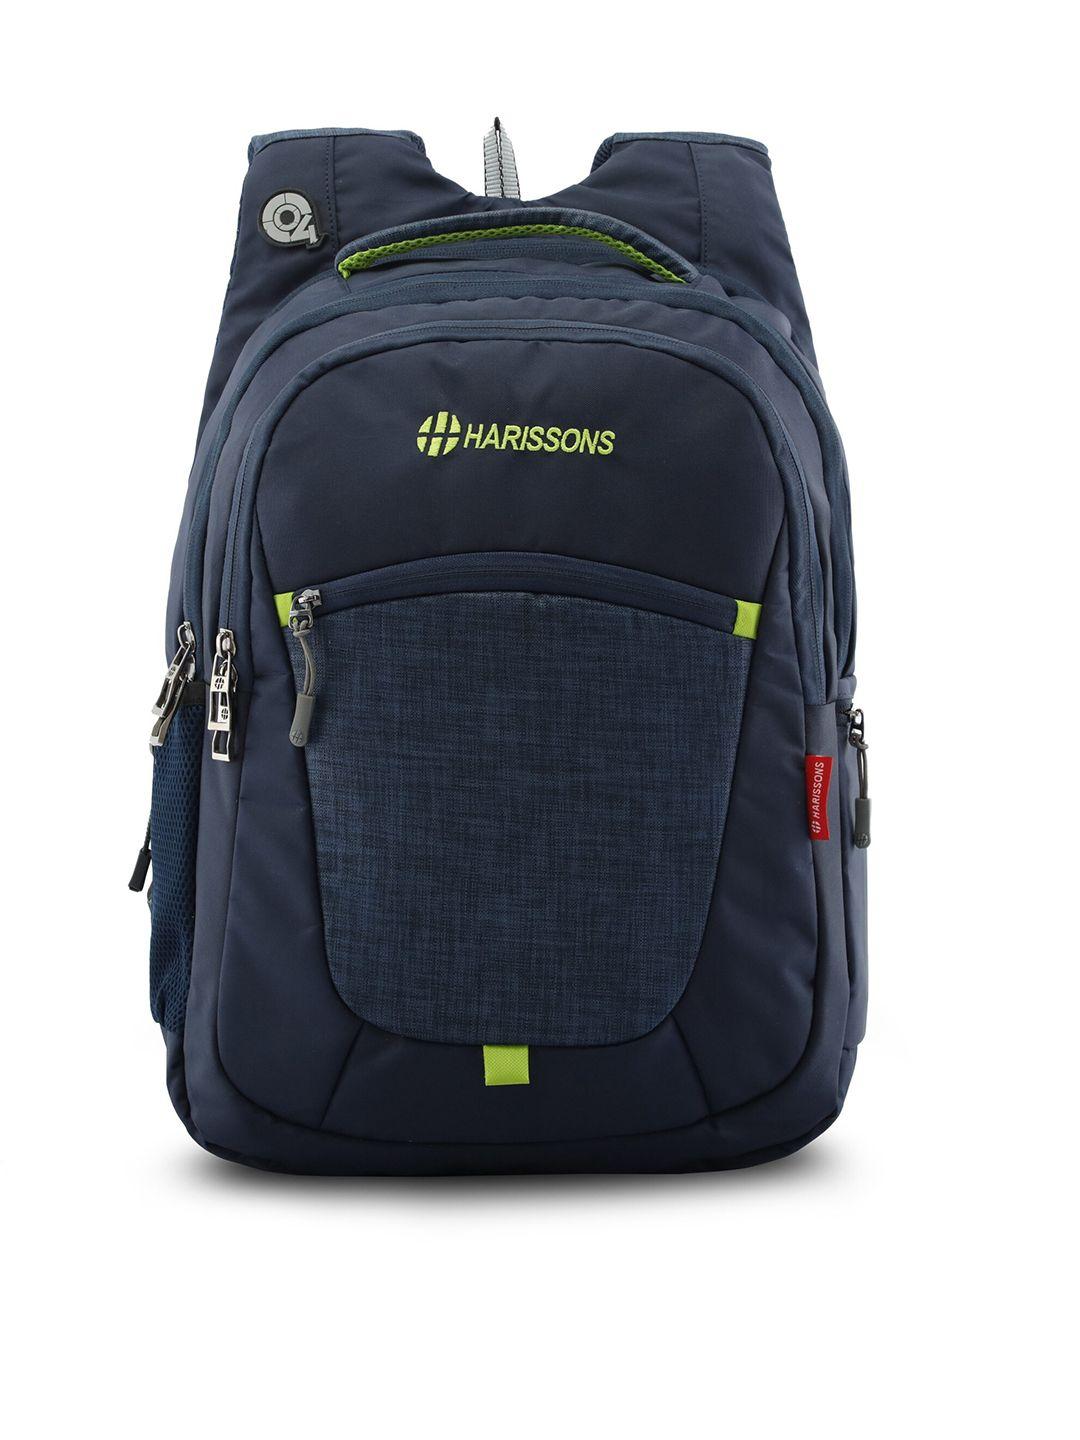 harissons navy blue 15 inch laptop backpack